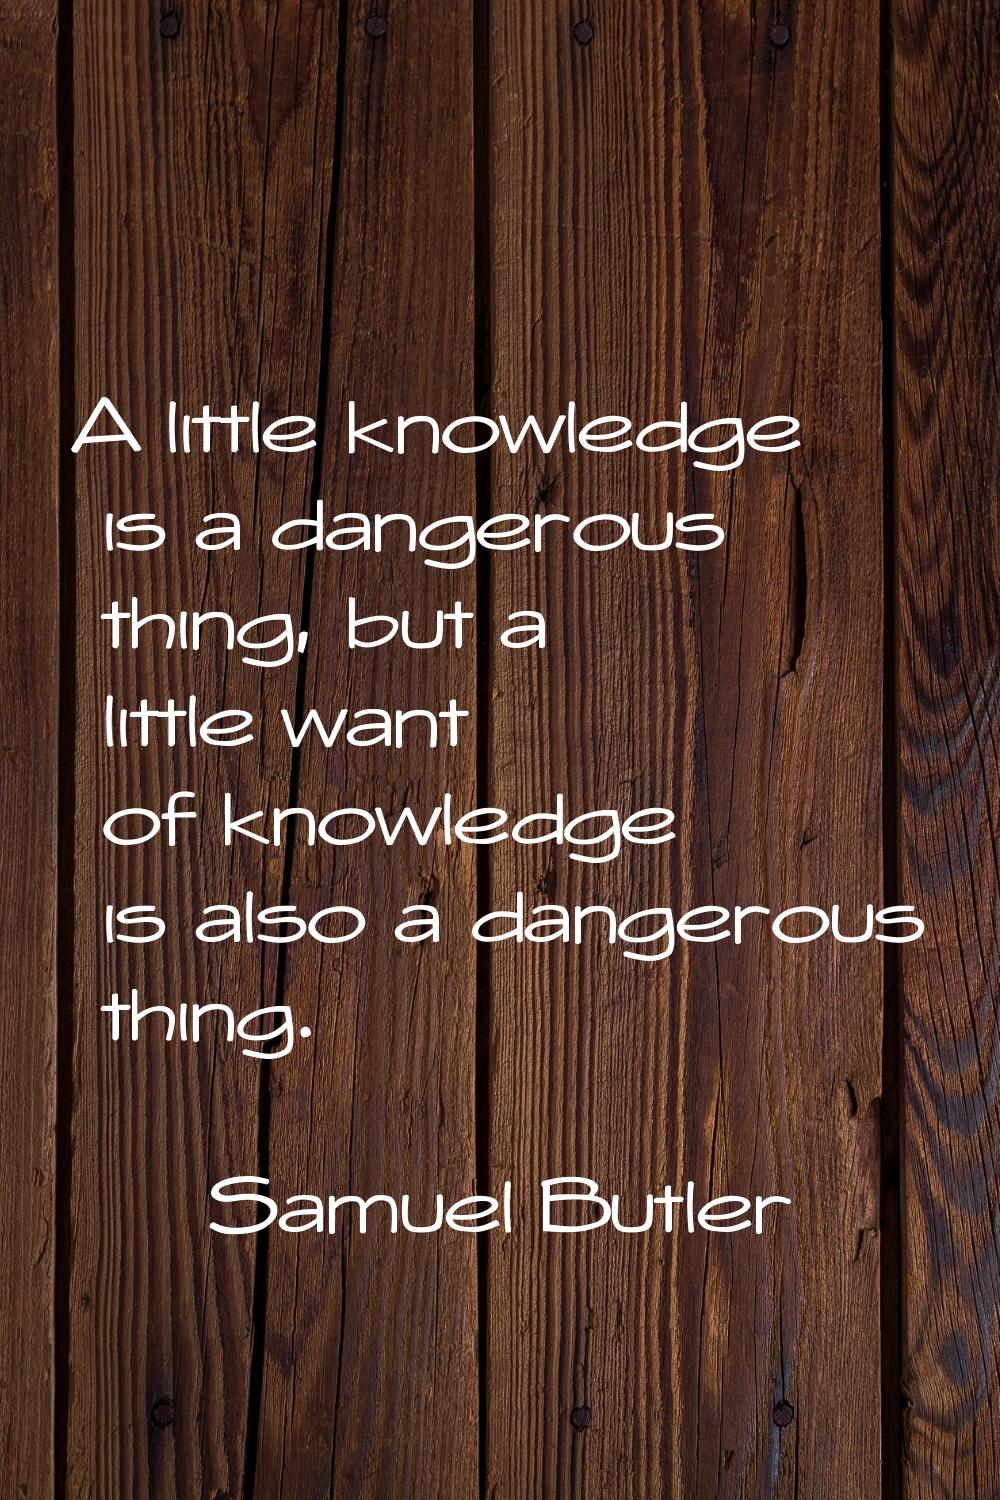 A little knowledge is a dangerous thing, but a little want of knowledge is also a dangerous thing.